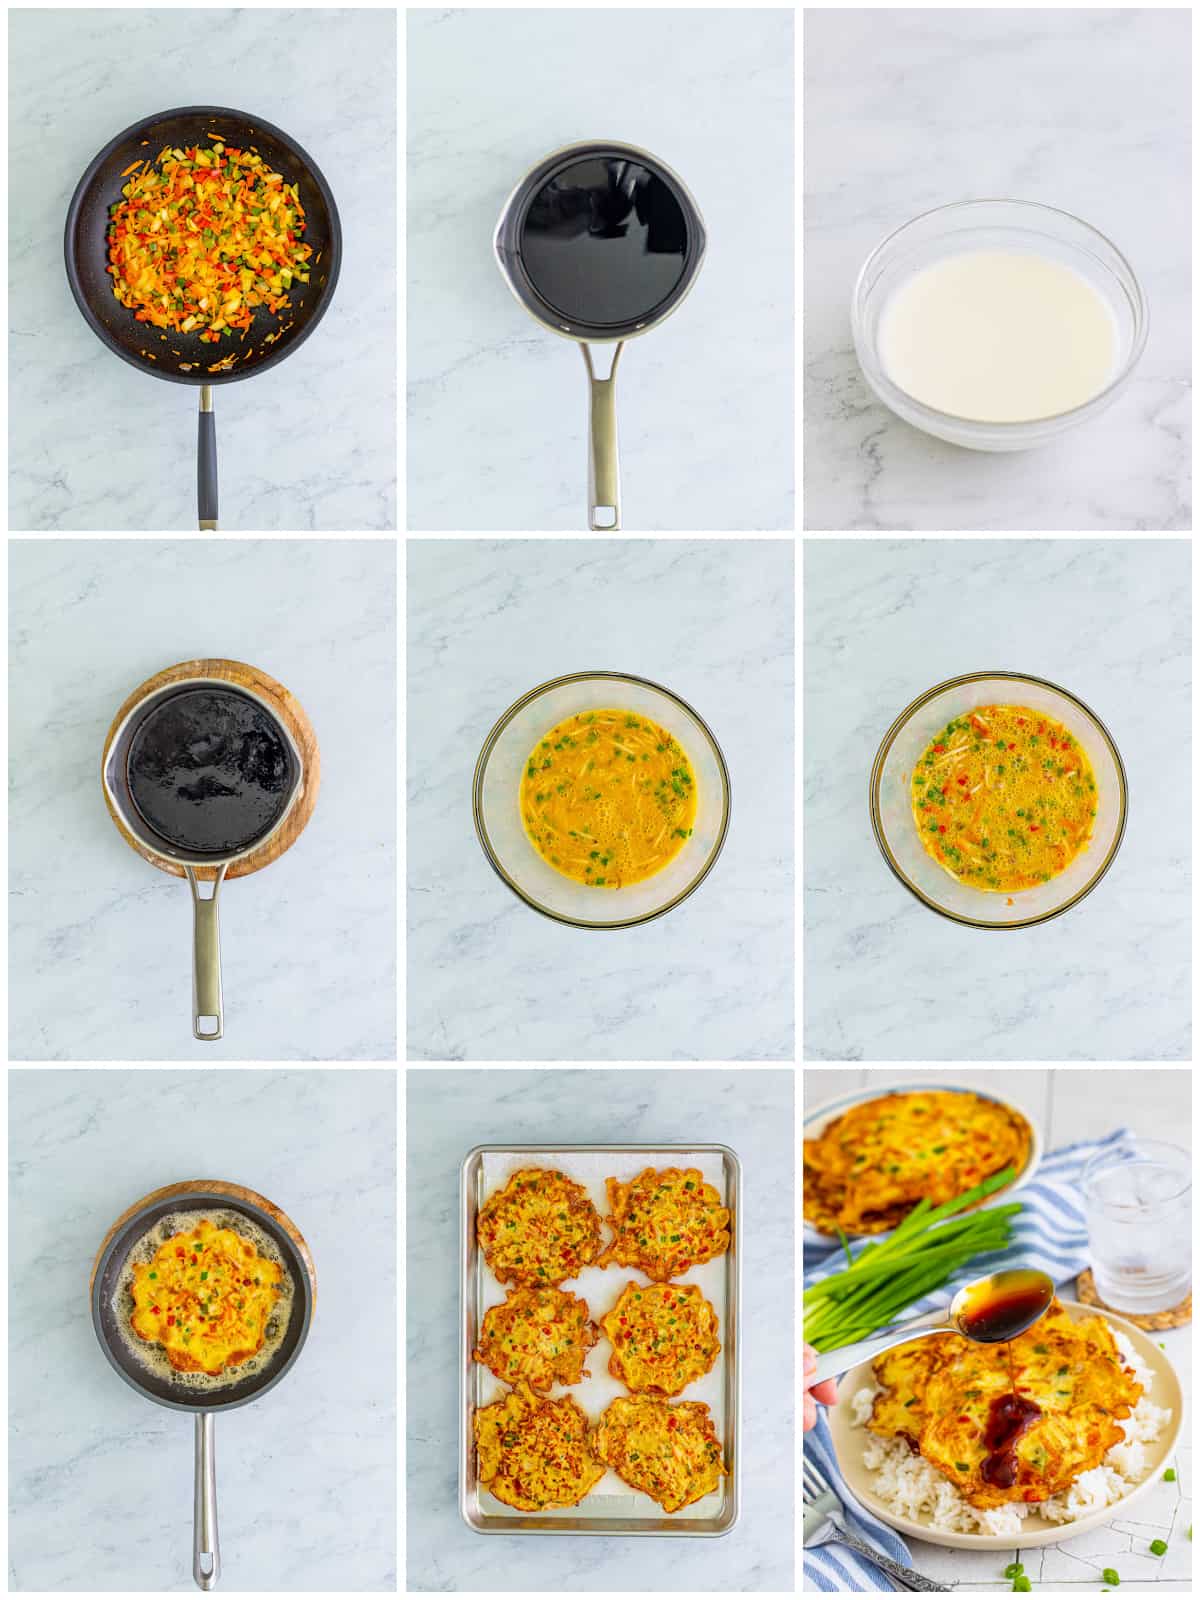 Step by step photos on how to make Vegetable Egg Foo Young.